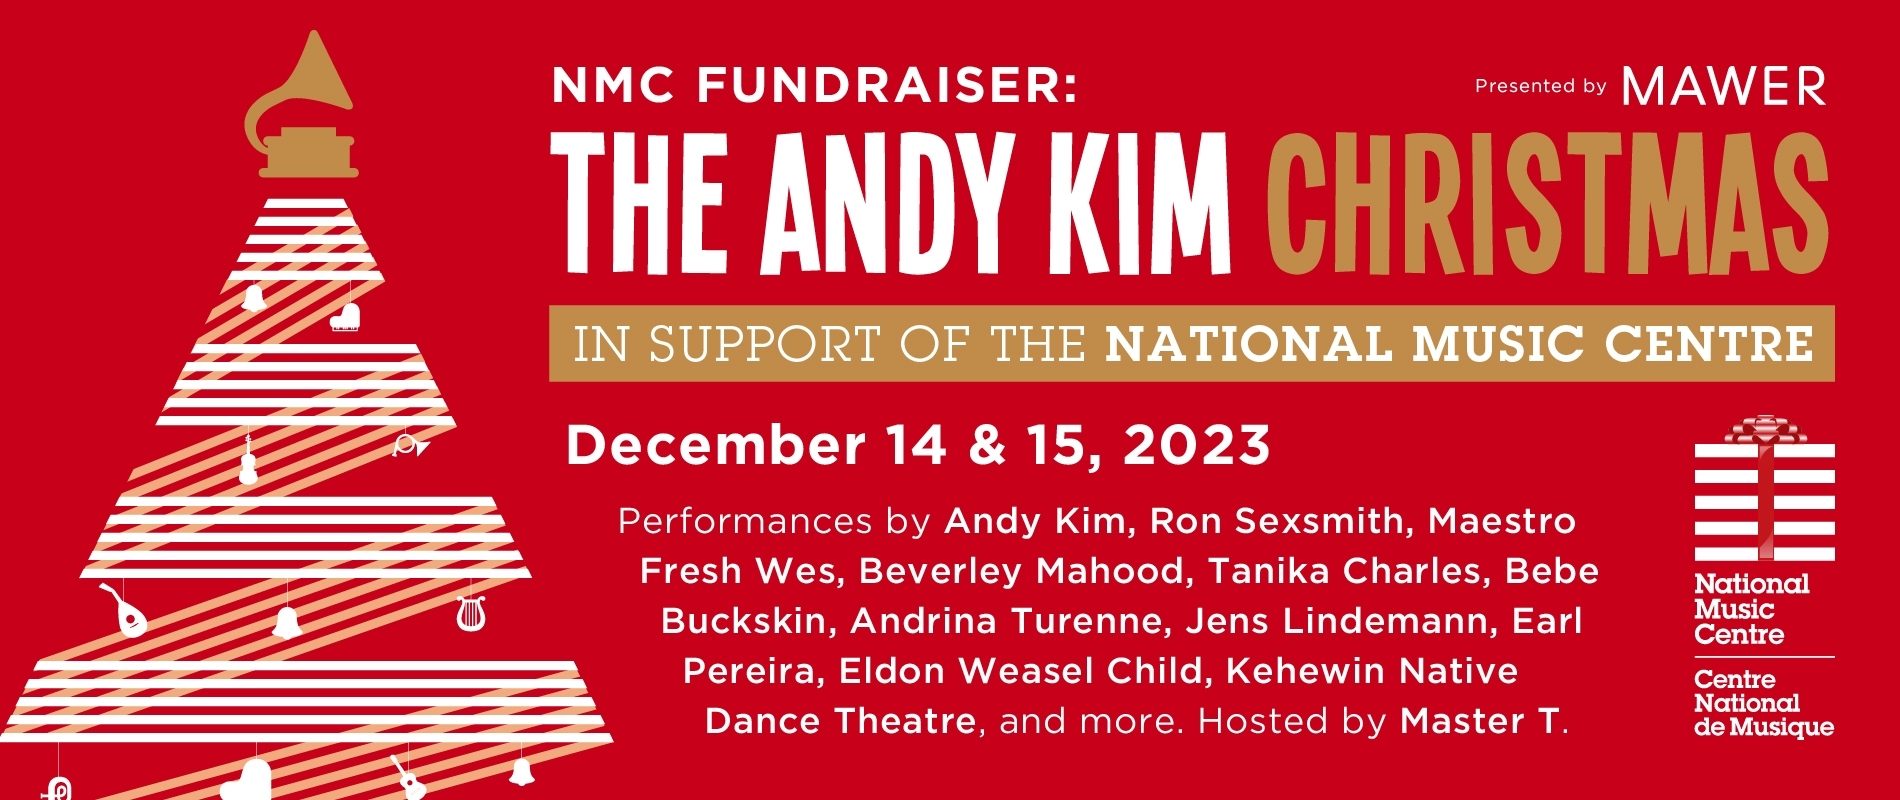 Hip-Hop Pioneer Maestro Fresh Wes and More Artists Added to The Andy Kim Christmas Lineup on December 14 and 15